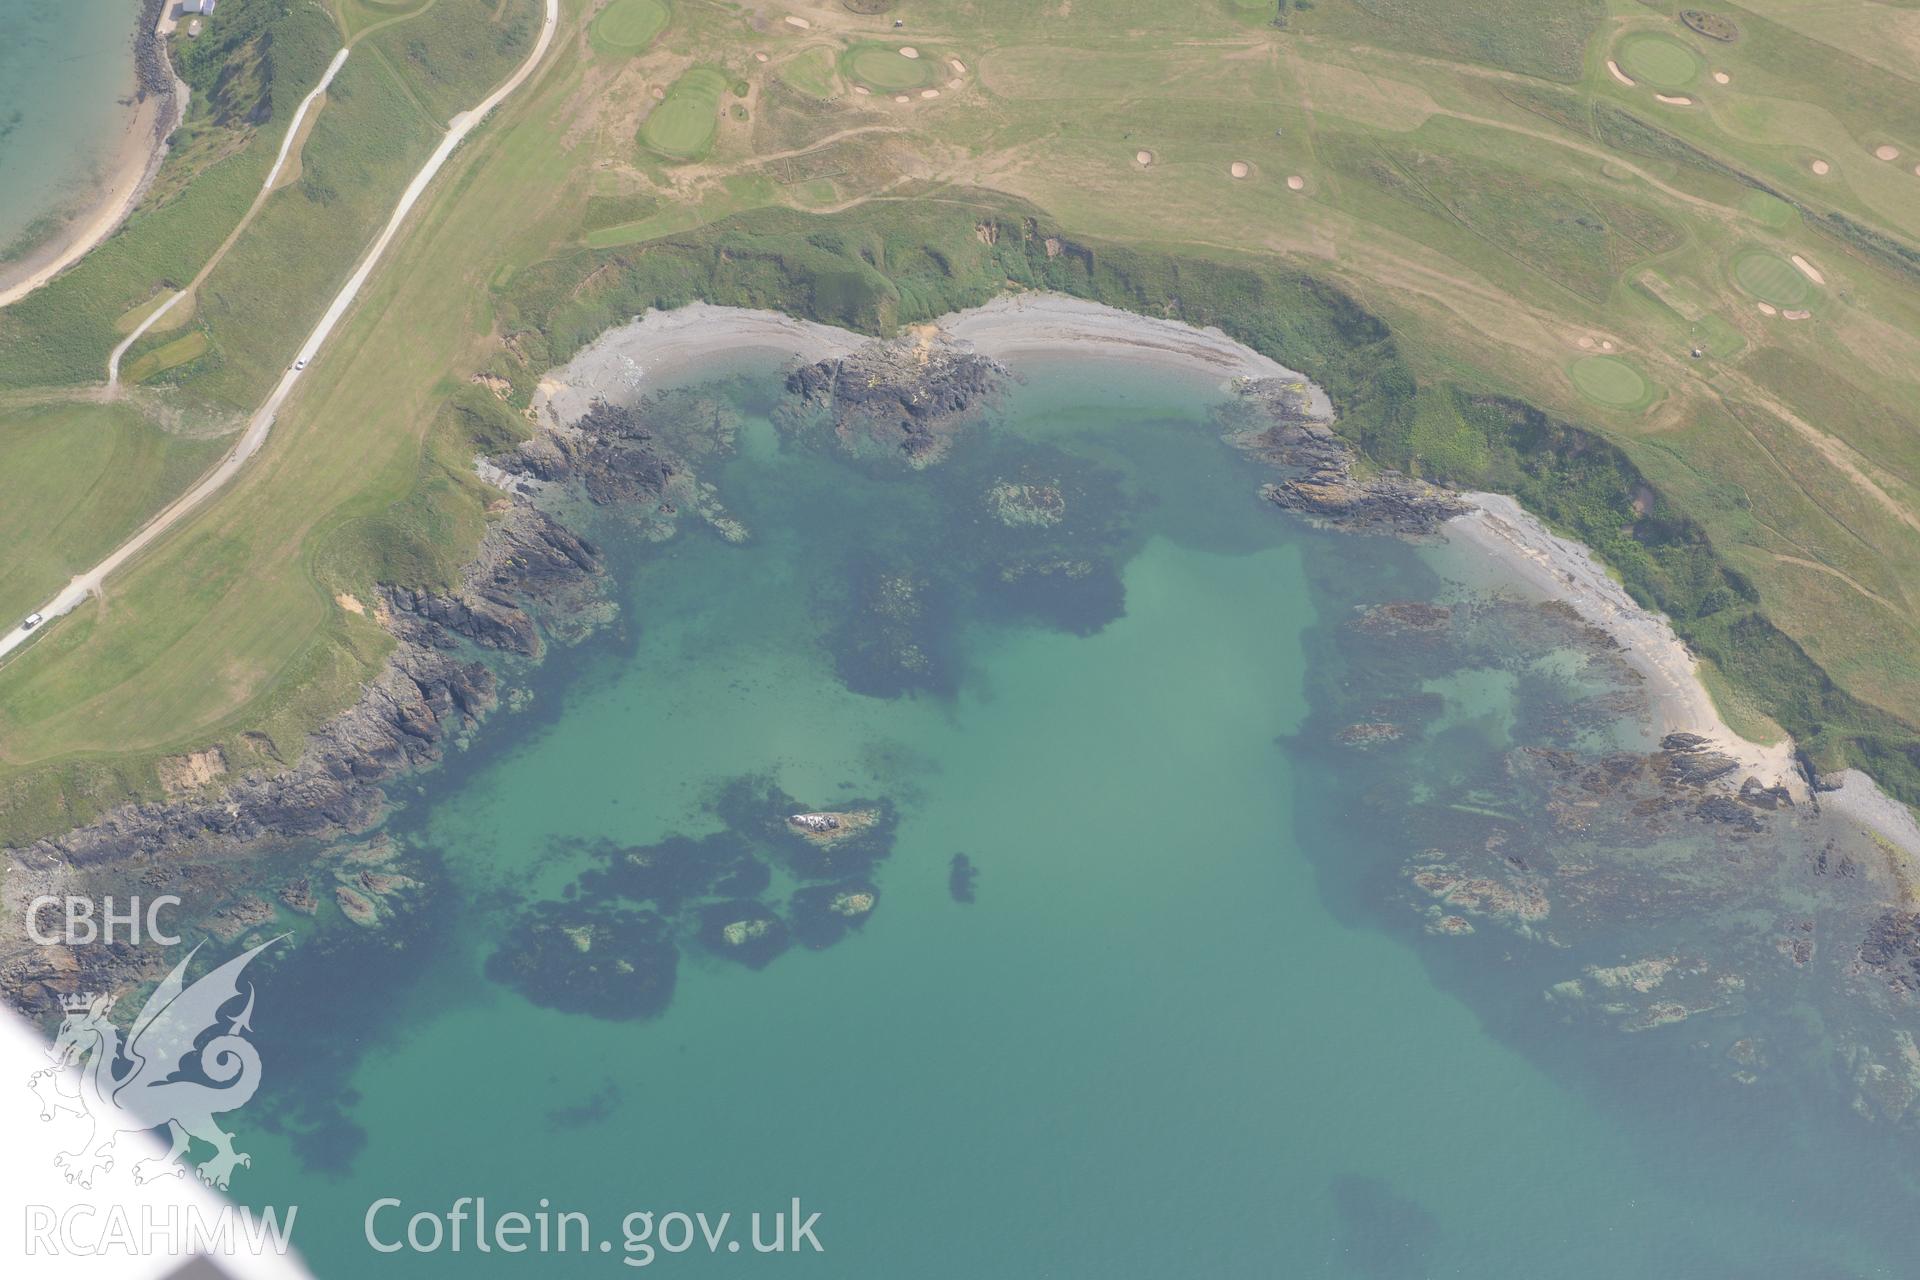 Trwyn Porth Dinllaen Promontory Enclosure, Porth Dinllaen, Morfa Nefyn, on the Lleyn Peninsula. Oblique aerial photograph taken during the Royal Commission?s programme of archaeological aerial reconnaissance by Toby Driver on 12th July 2013.